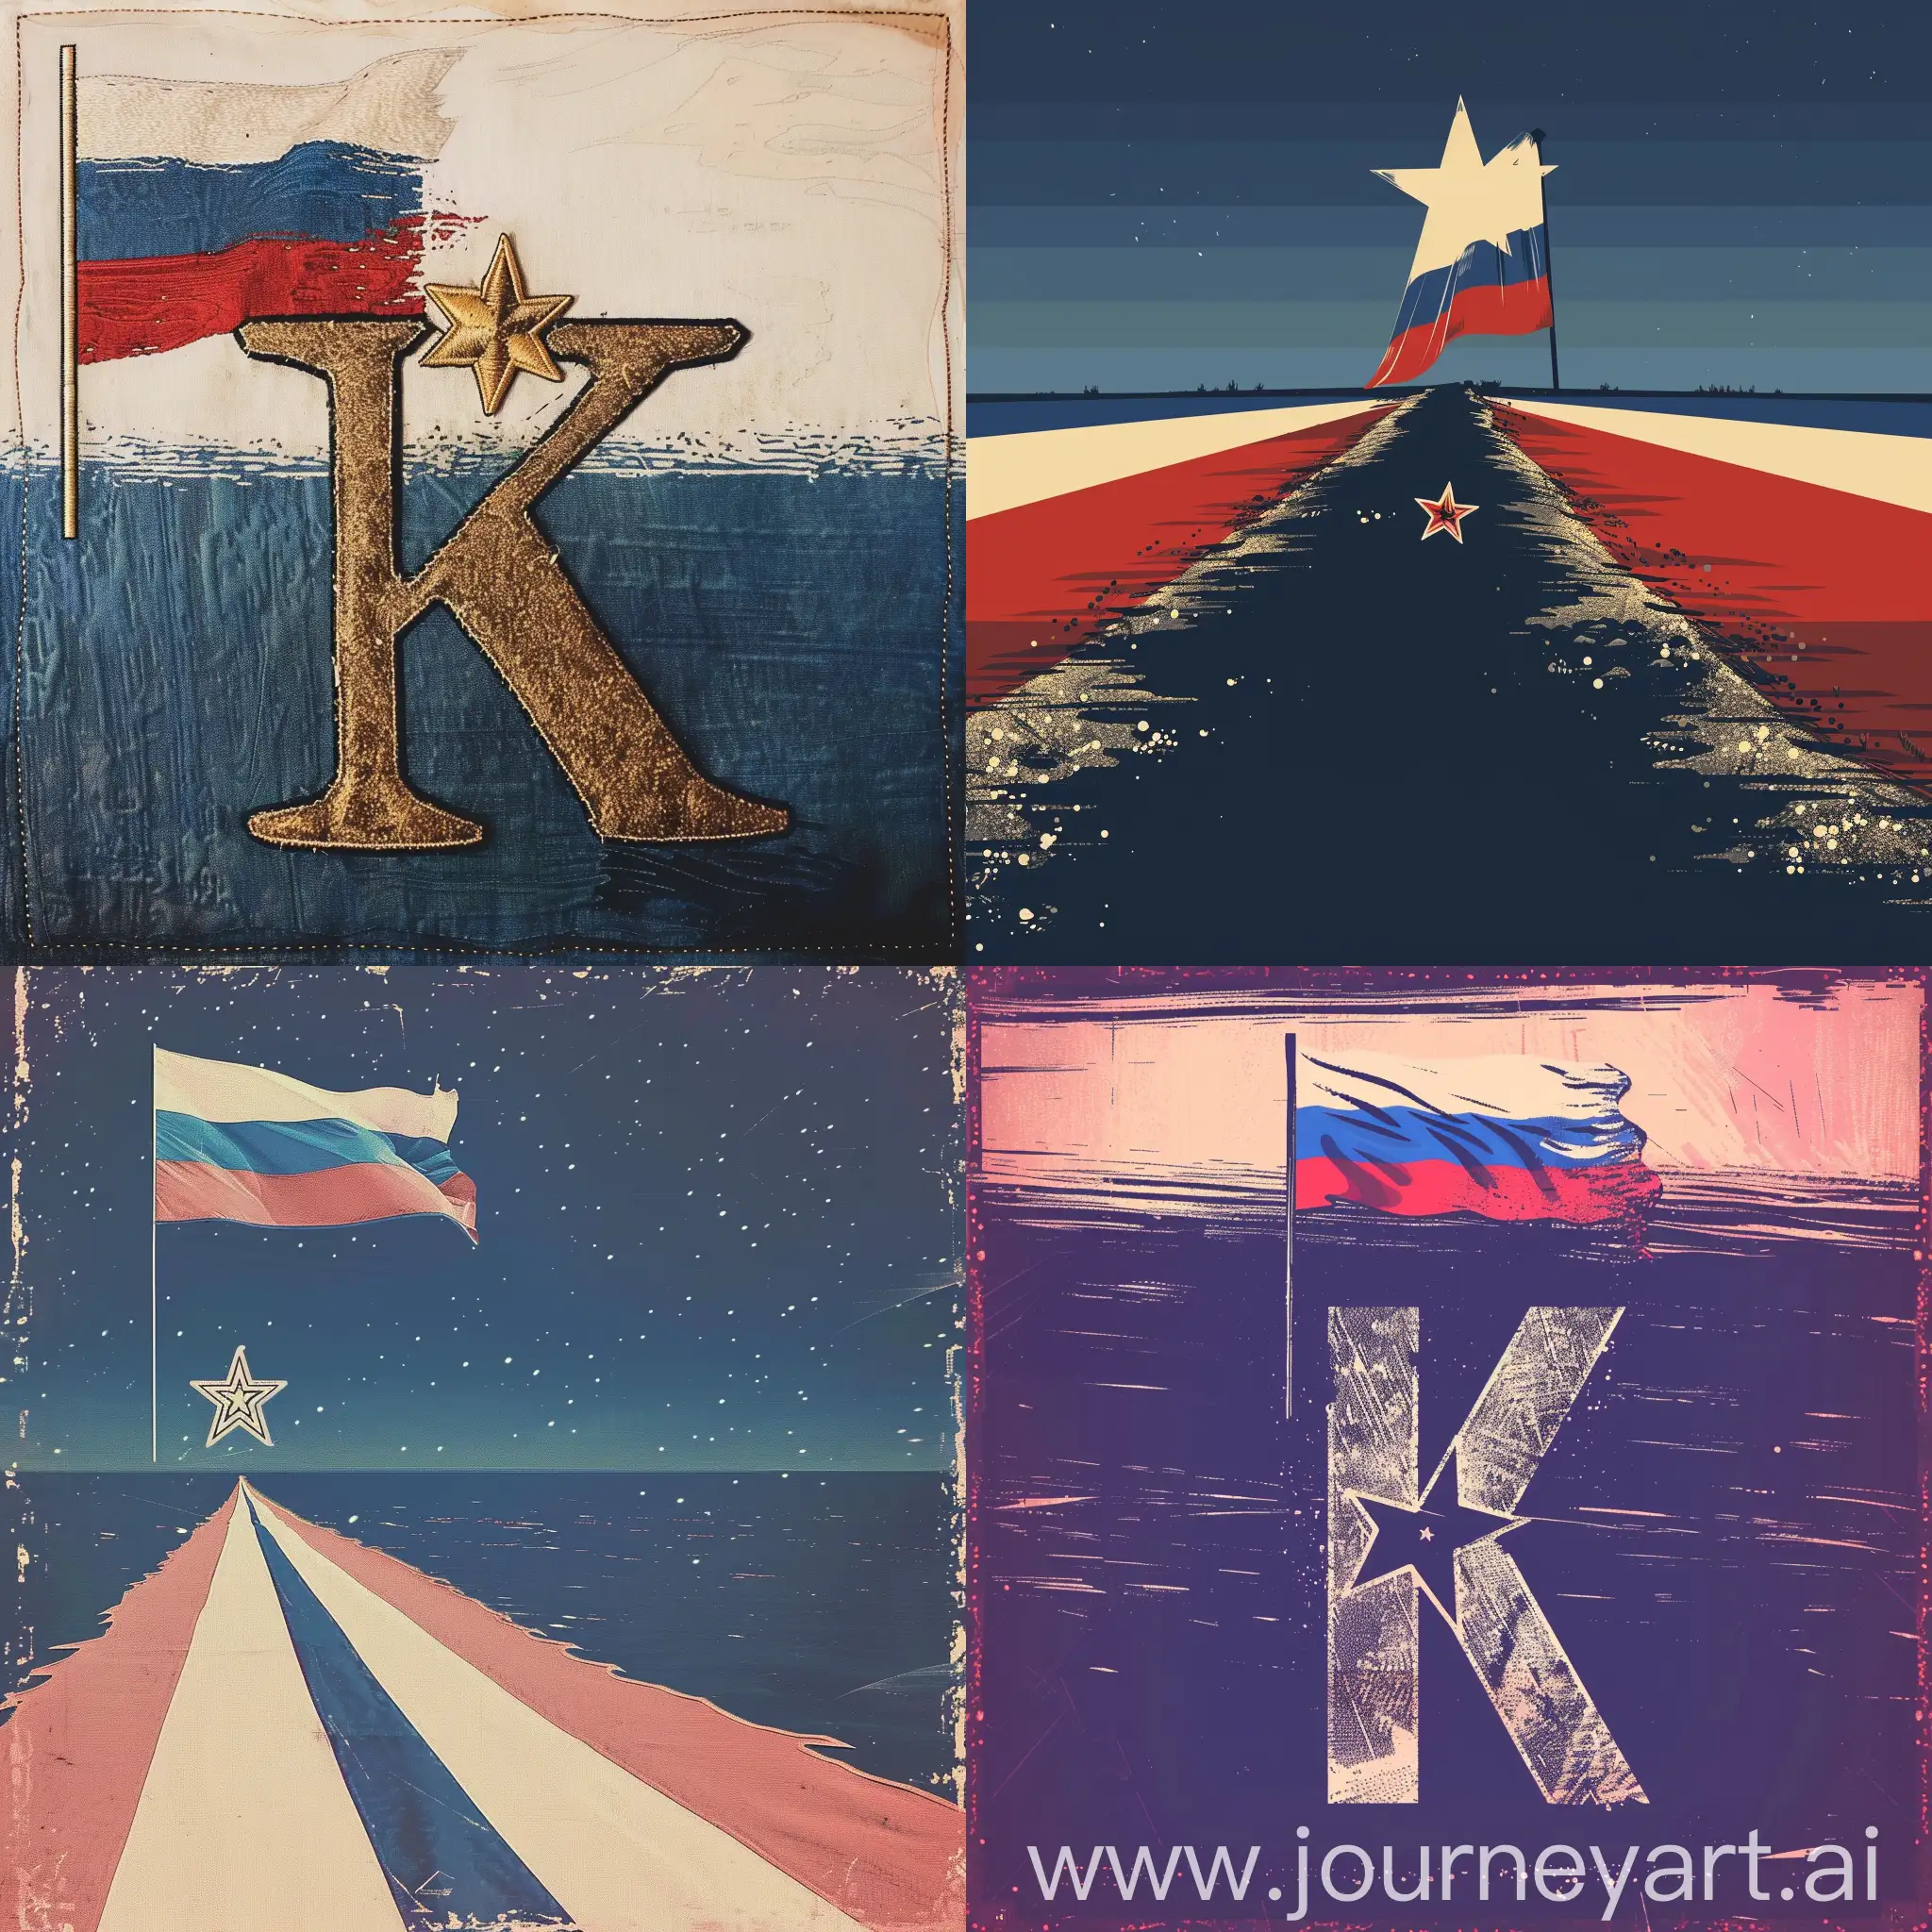 Russian-Flag-Vanishing-into-Distance-with-Star-Forming-Letter-K